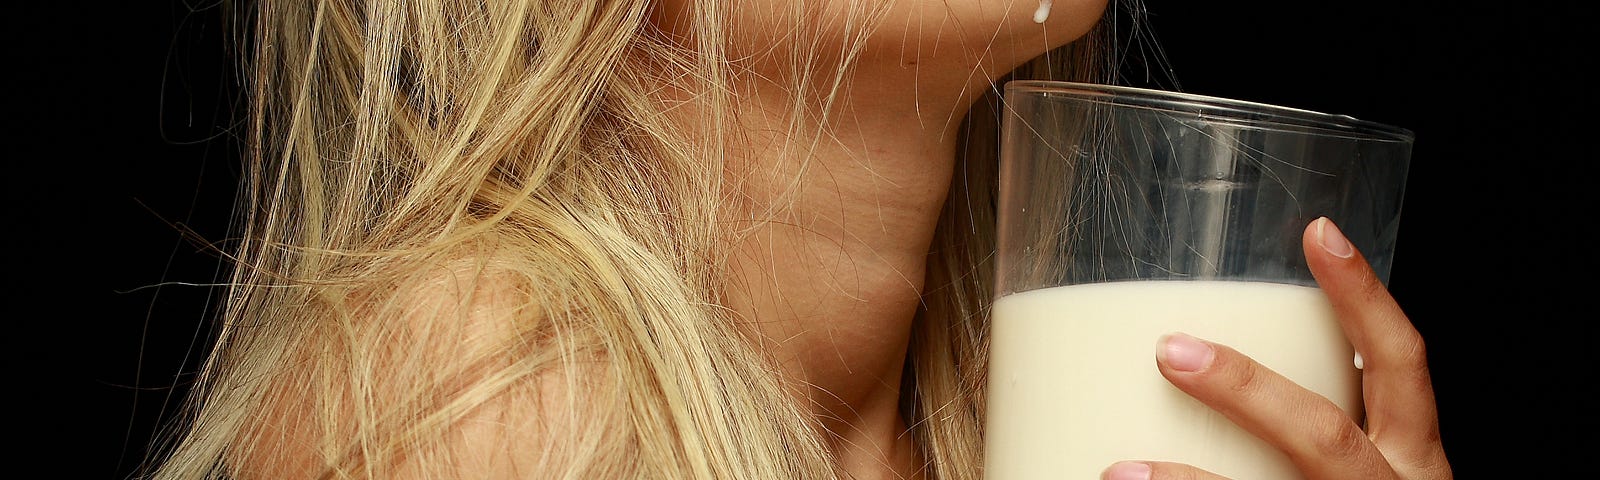 a woman in ecstasy, clutching a glass of milk to her chest.